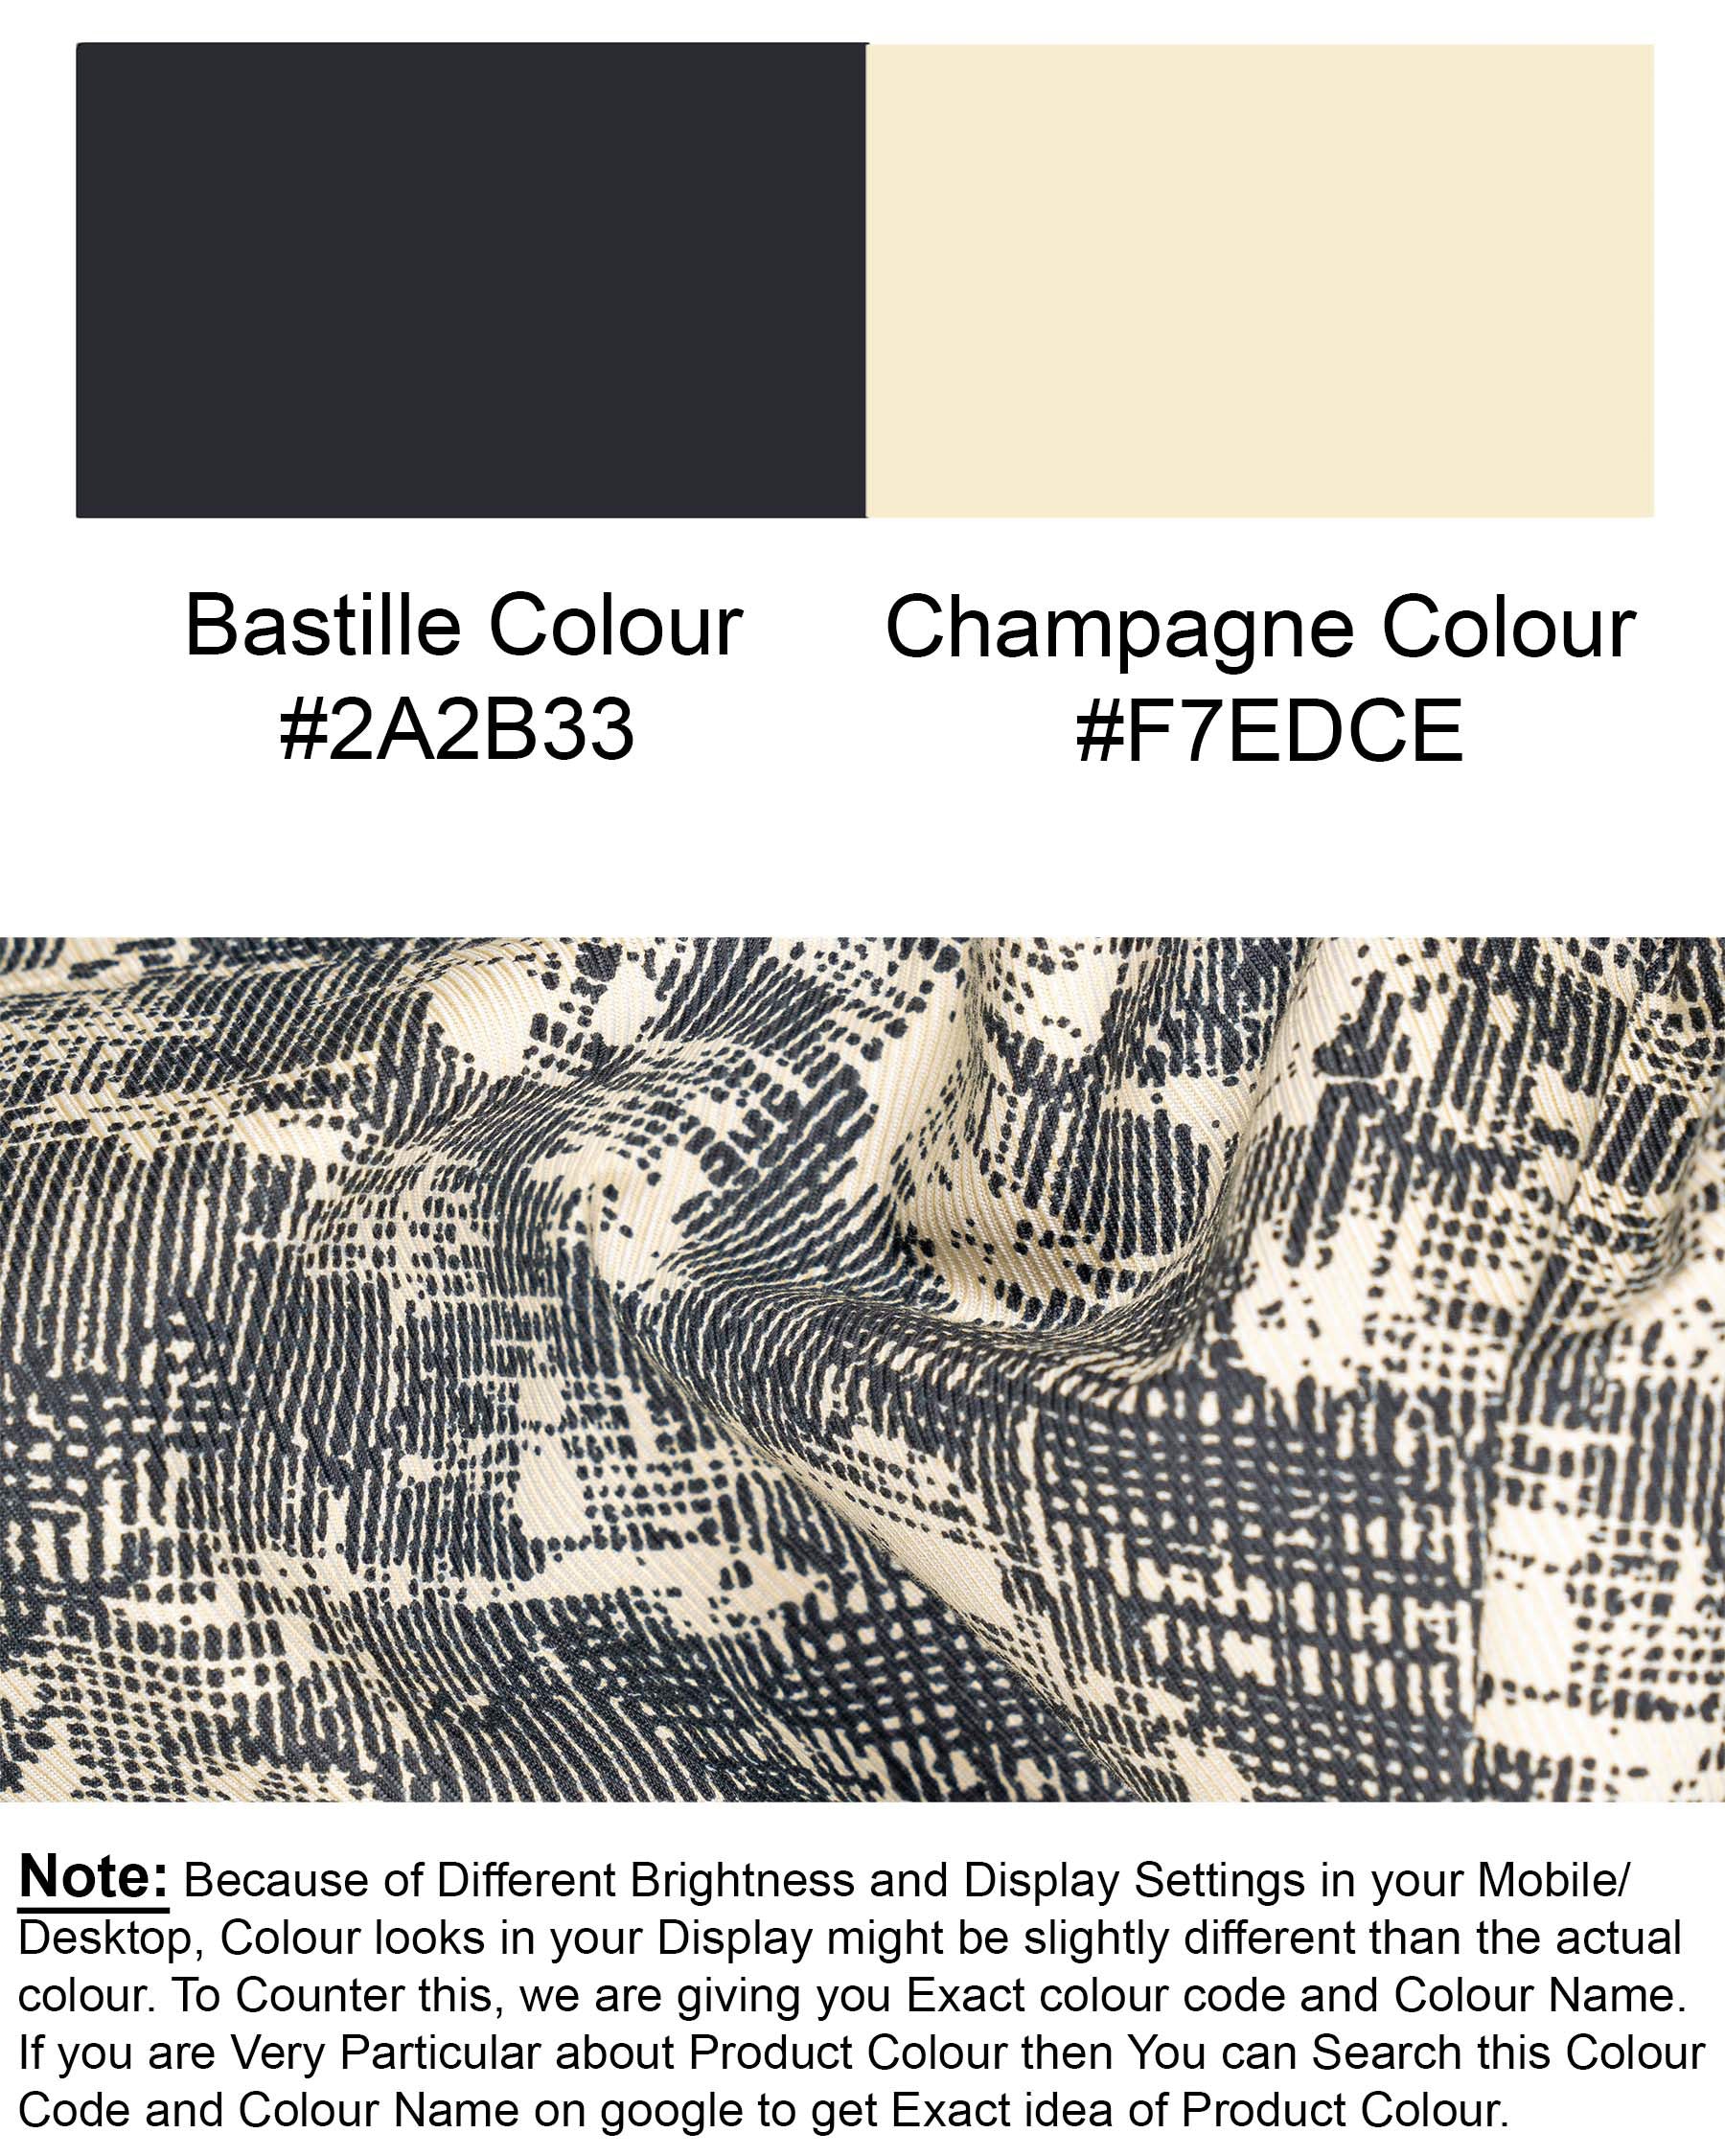 Bastille and Champagne Beige Abstract Print Designer Blazer BL1680-SB-PP-36, BL1680-SB-PP-38, BL1680-SB-PP-40, BL1680-SB-PP-42, BL1680-SB-PP-44, BL1680-SB-PP-46, BL1680-SB-PP-48, BL1680-SB-PP-50, BL1680-SB-PP-52, BL1680-SB-PP-54, BL1680-SB-PP-56, BL1680-SB-PP-58, BL1680-SB-PP-60